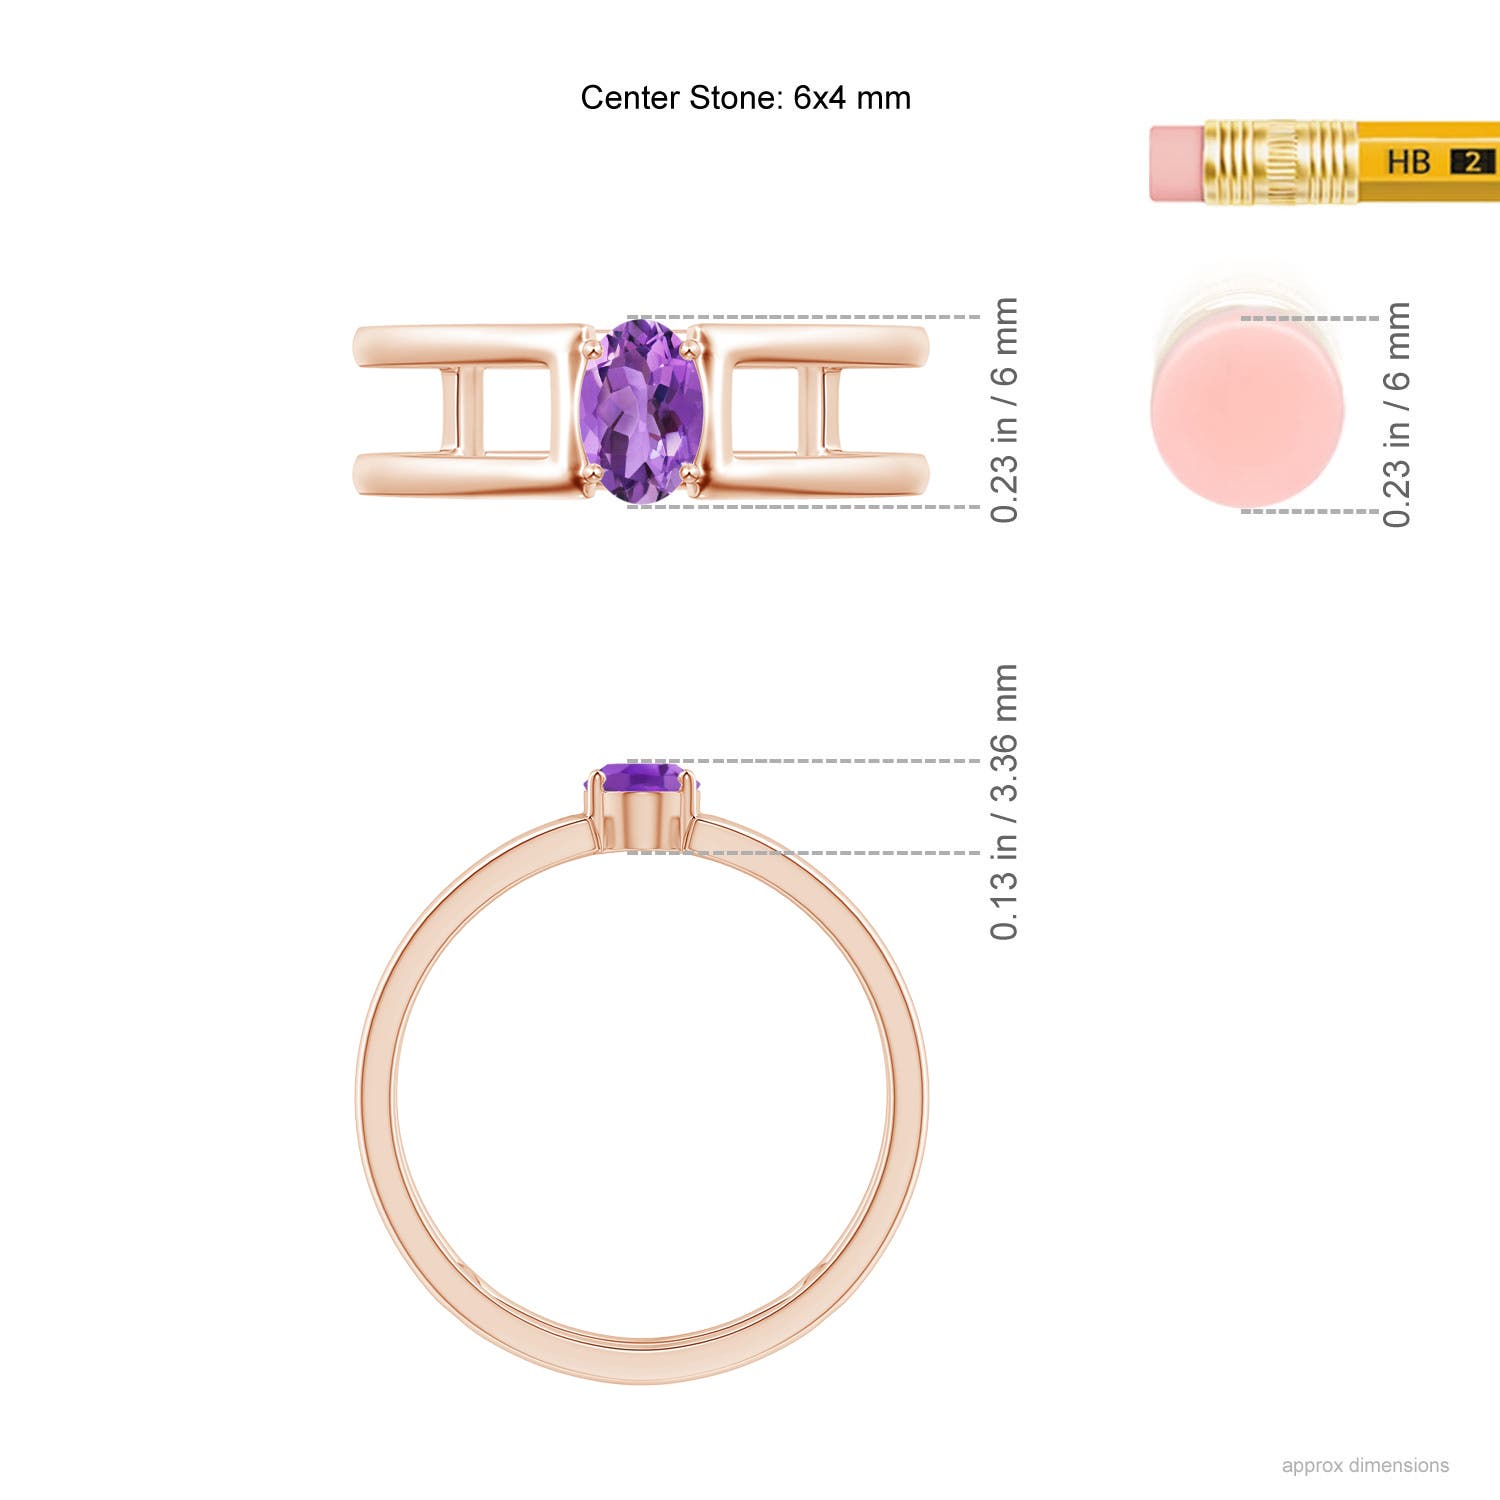 AA - Amethyst / 0.4 CT / 14 KT Rose Gold